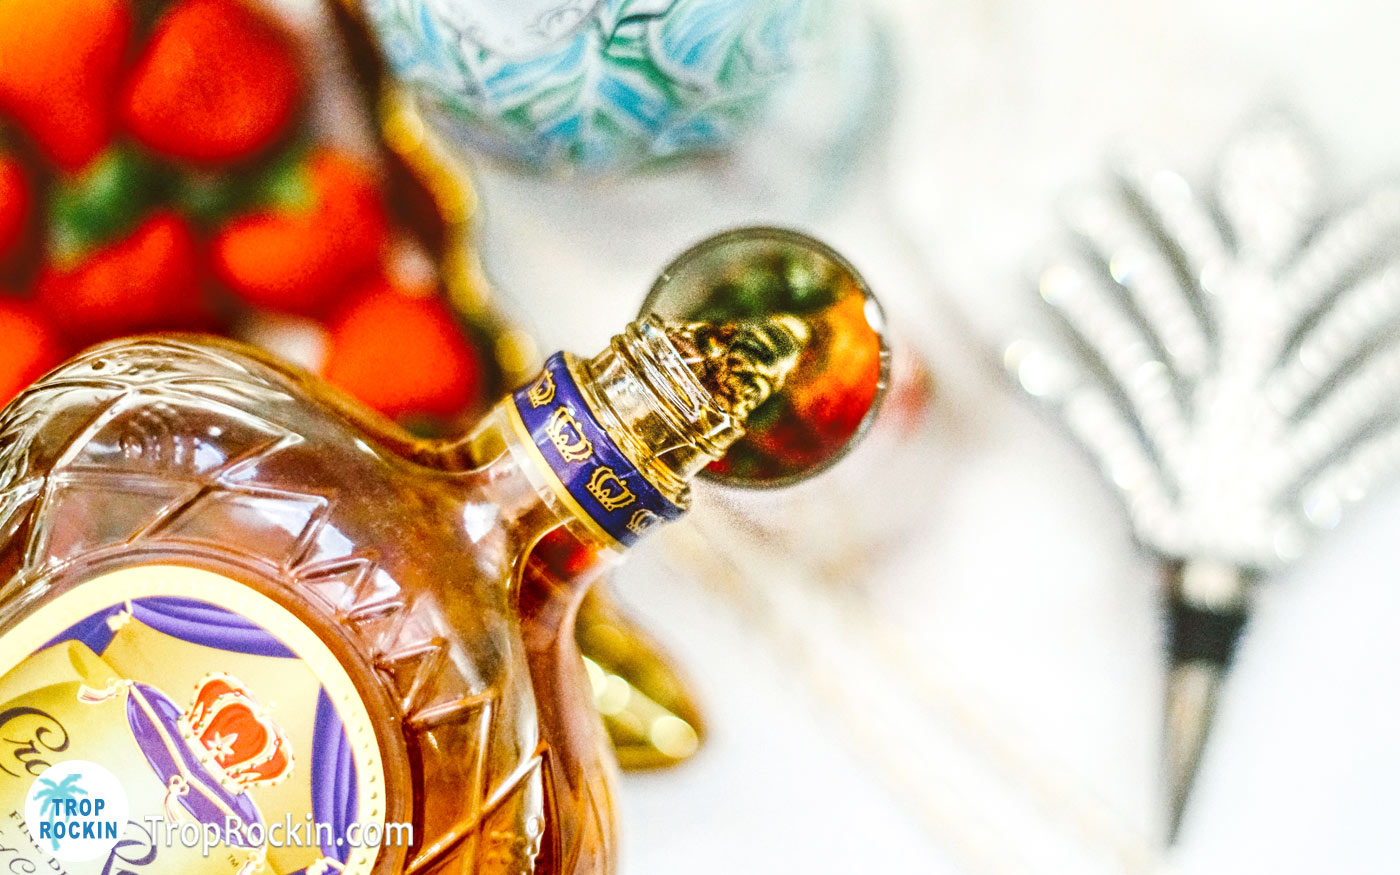 Pouring crown royal whiskey into glass over strawberries.